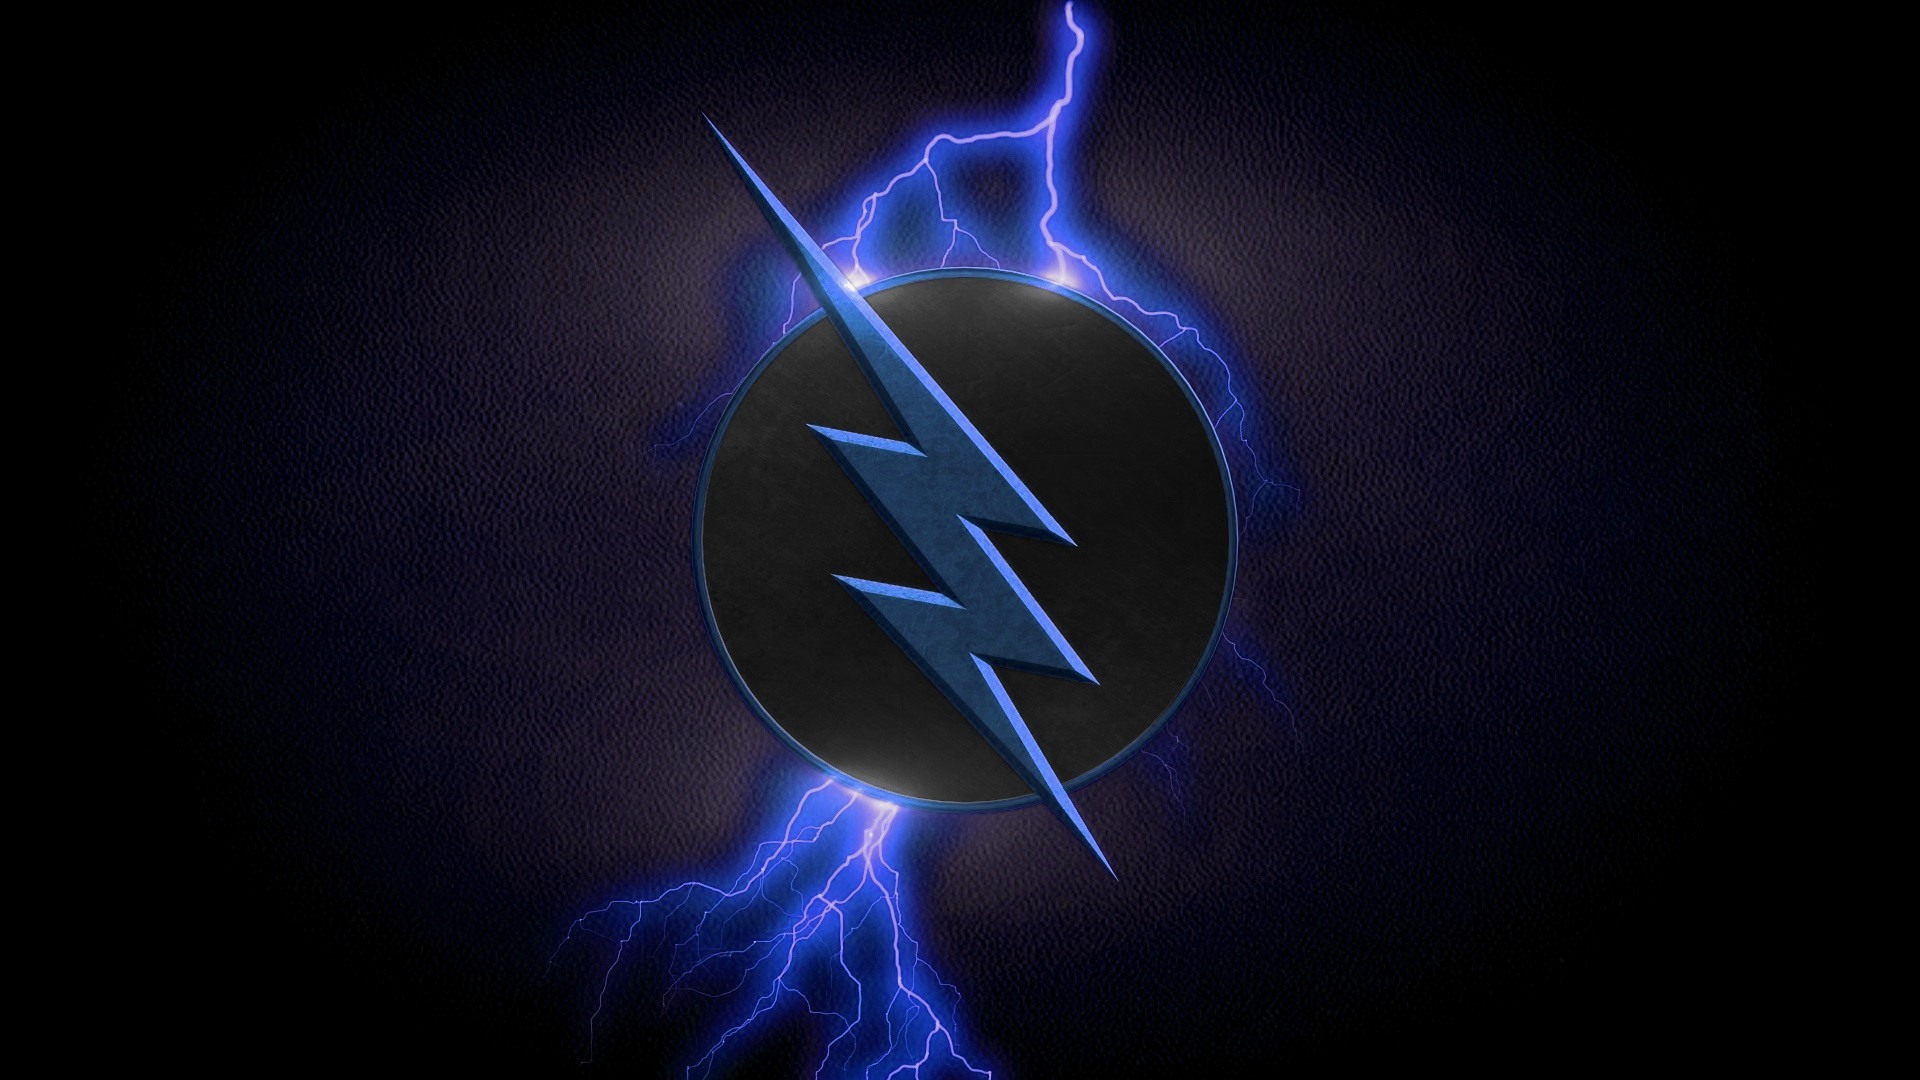 Flash CW Zoom Backgrounds PC, Mobile, Gadgets Compatible 1920×1080